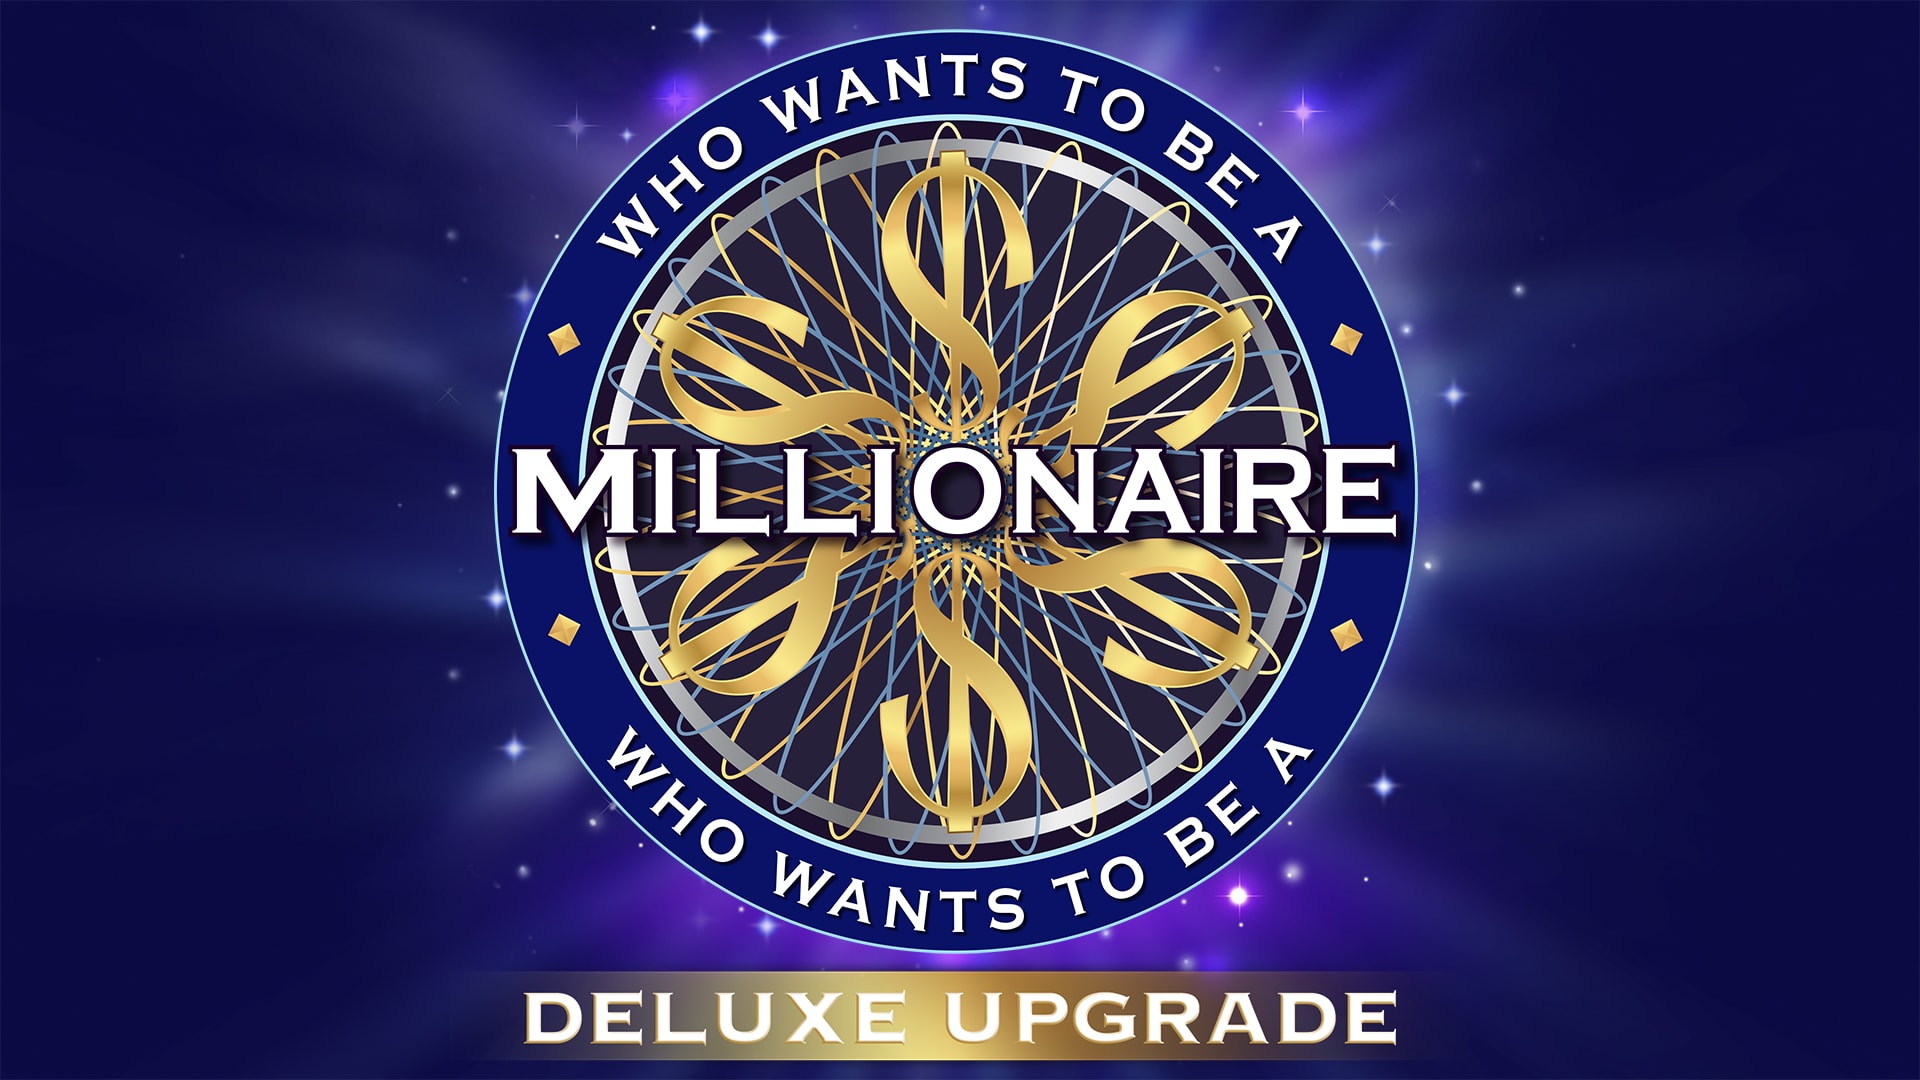 WHO WANTS TO BE A MILLIONAIRE? – DELUXE UPGRADE